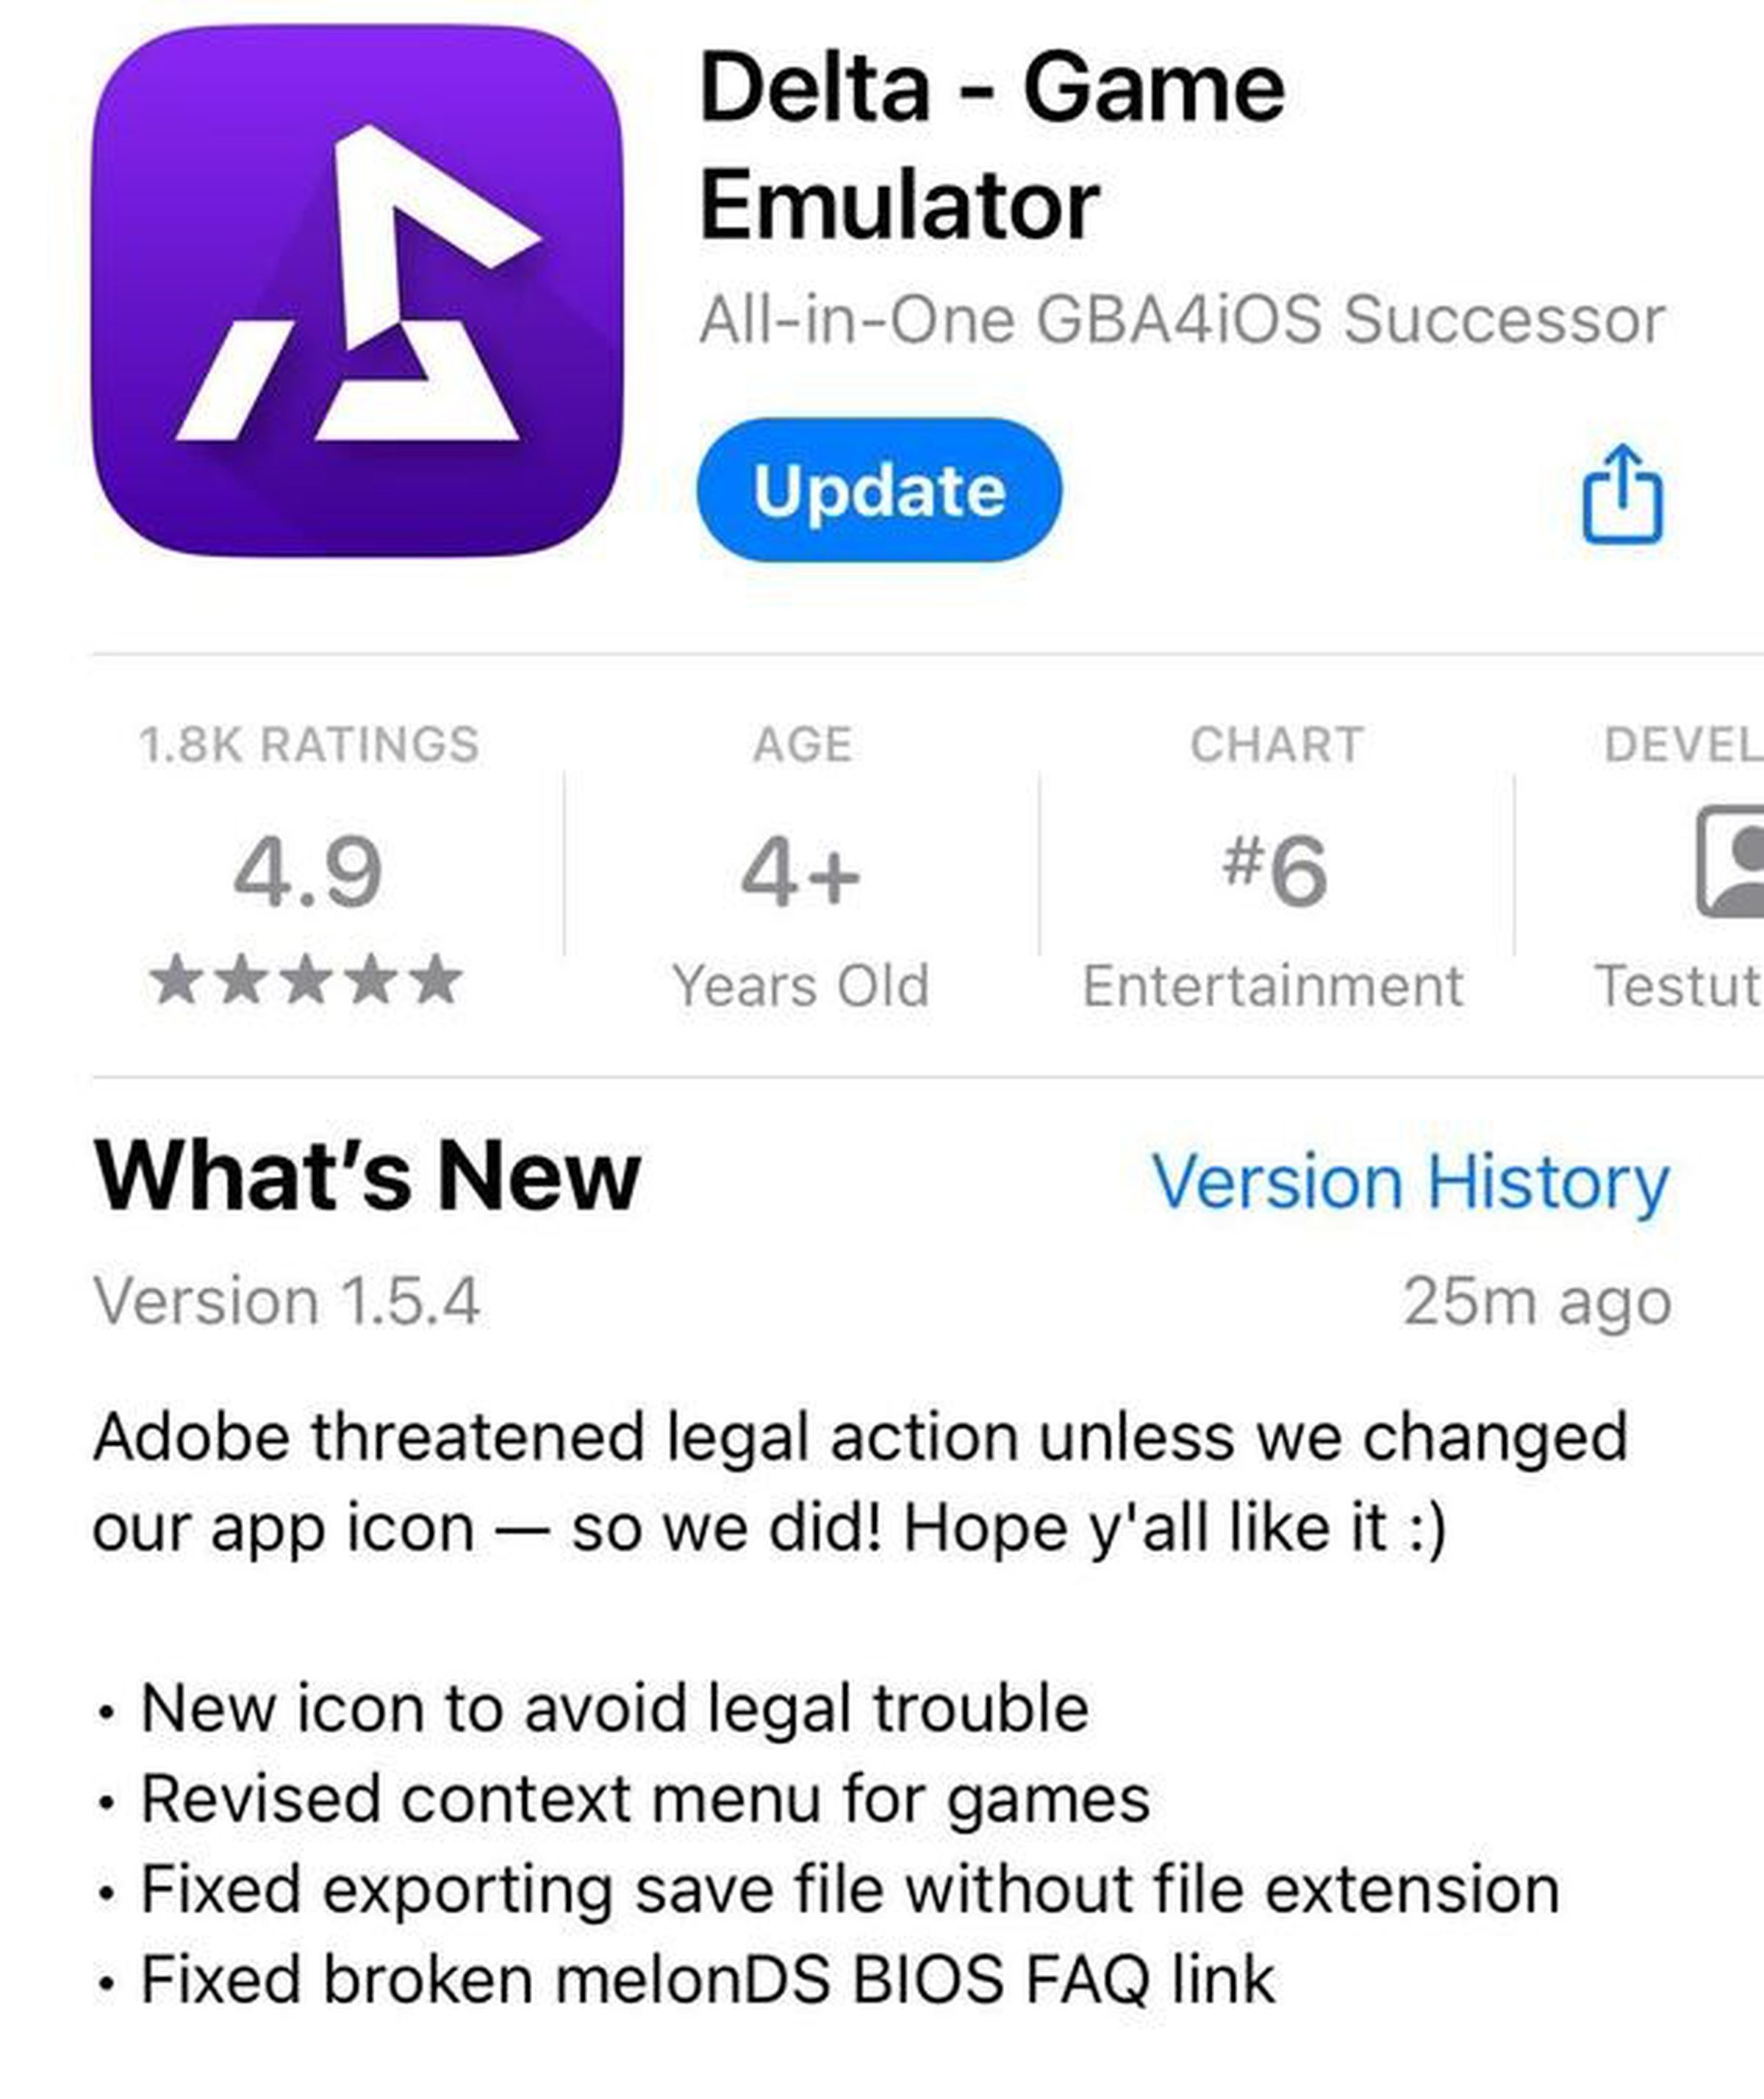 “Adobe threatened legal action unless we changed our app icon — so we did!” it reads.